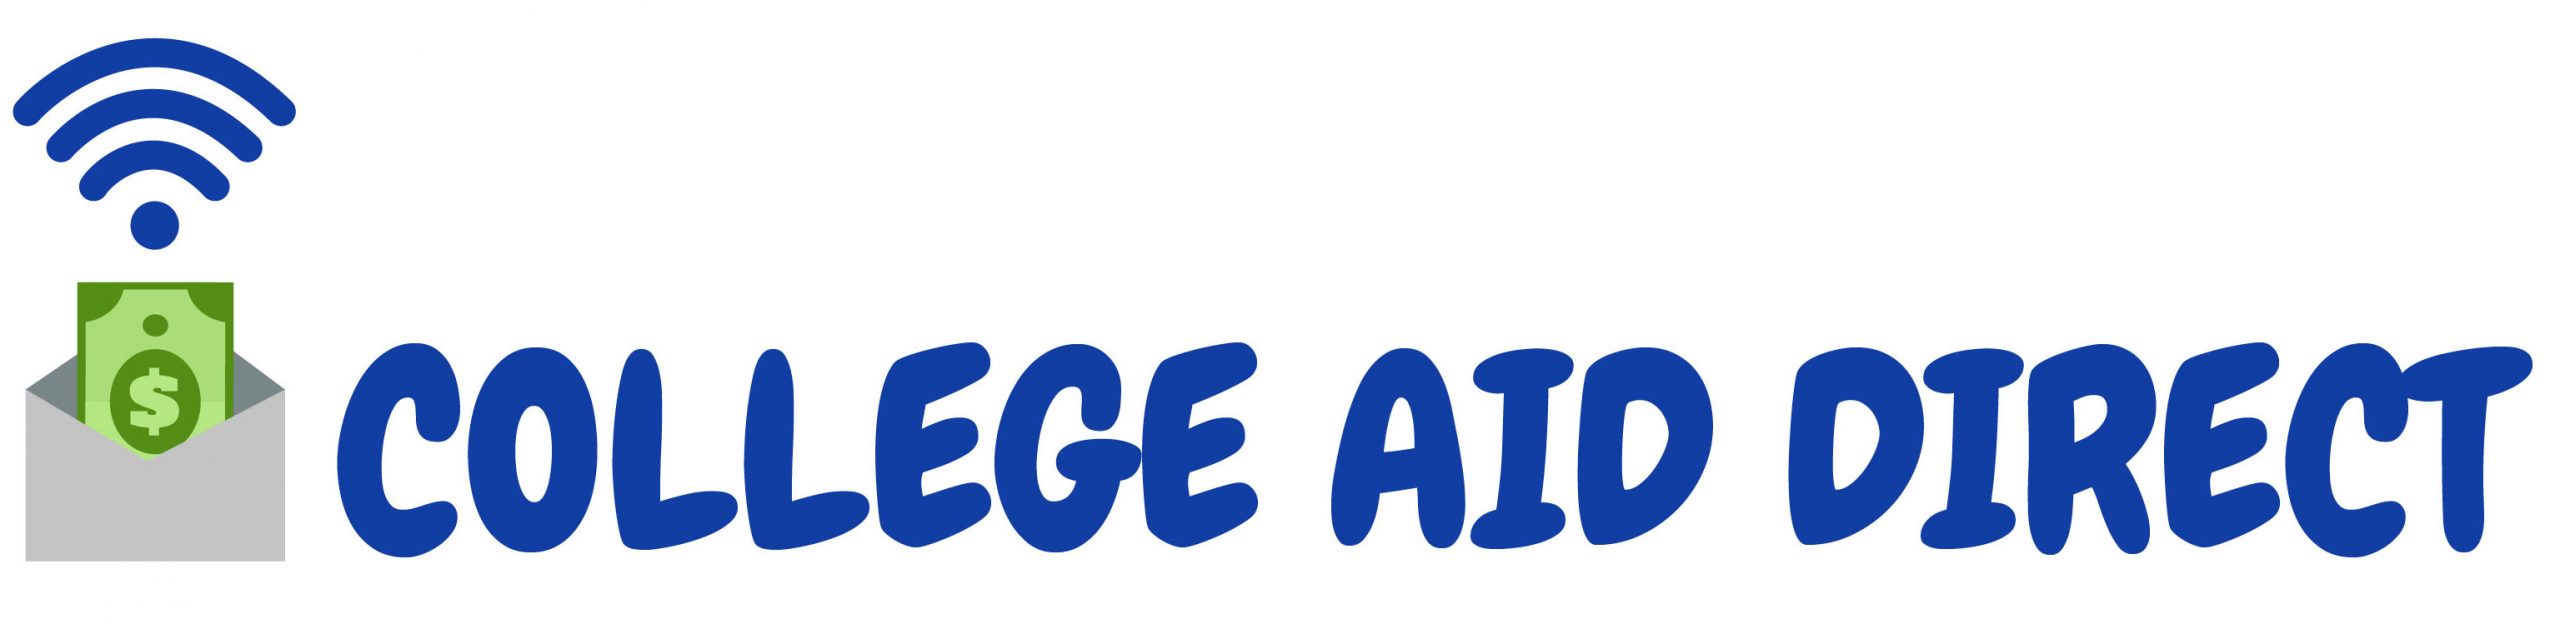 College Aid Direct